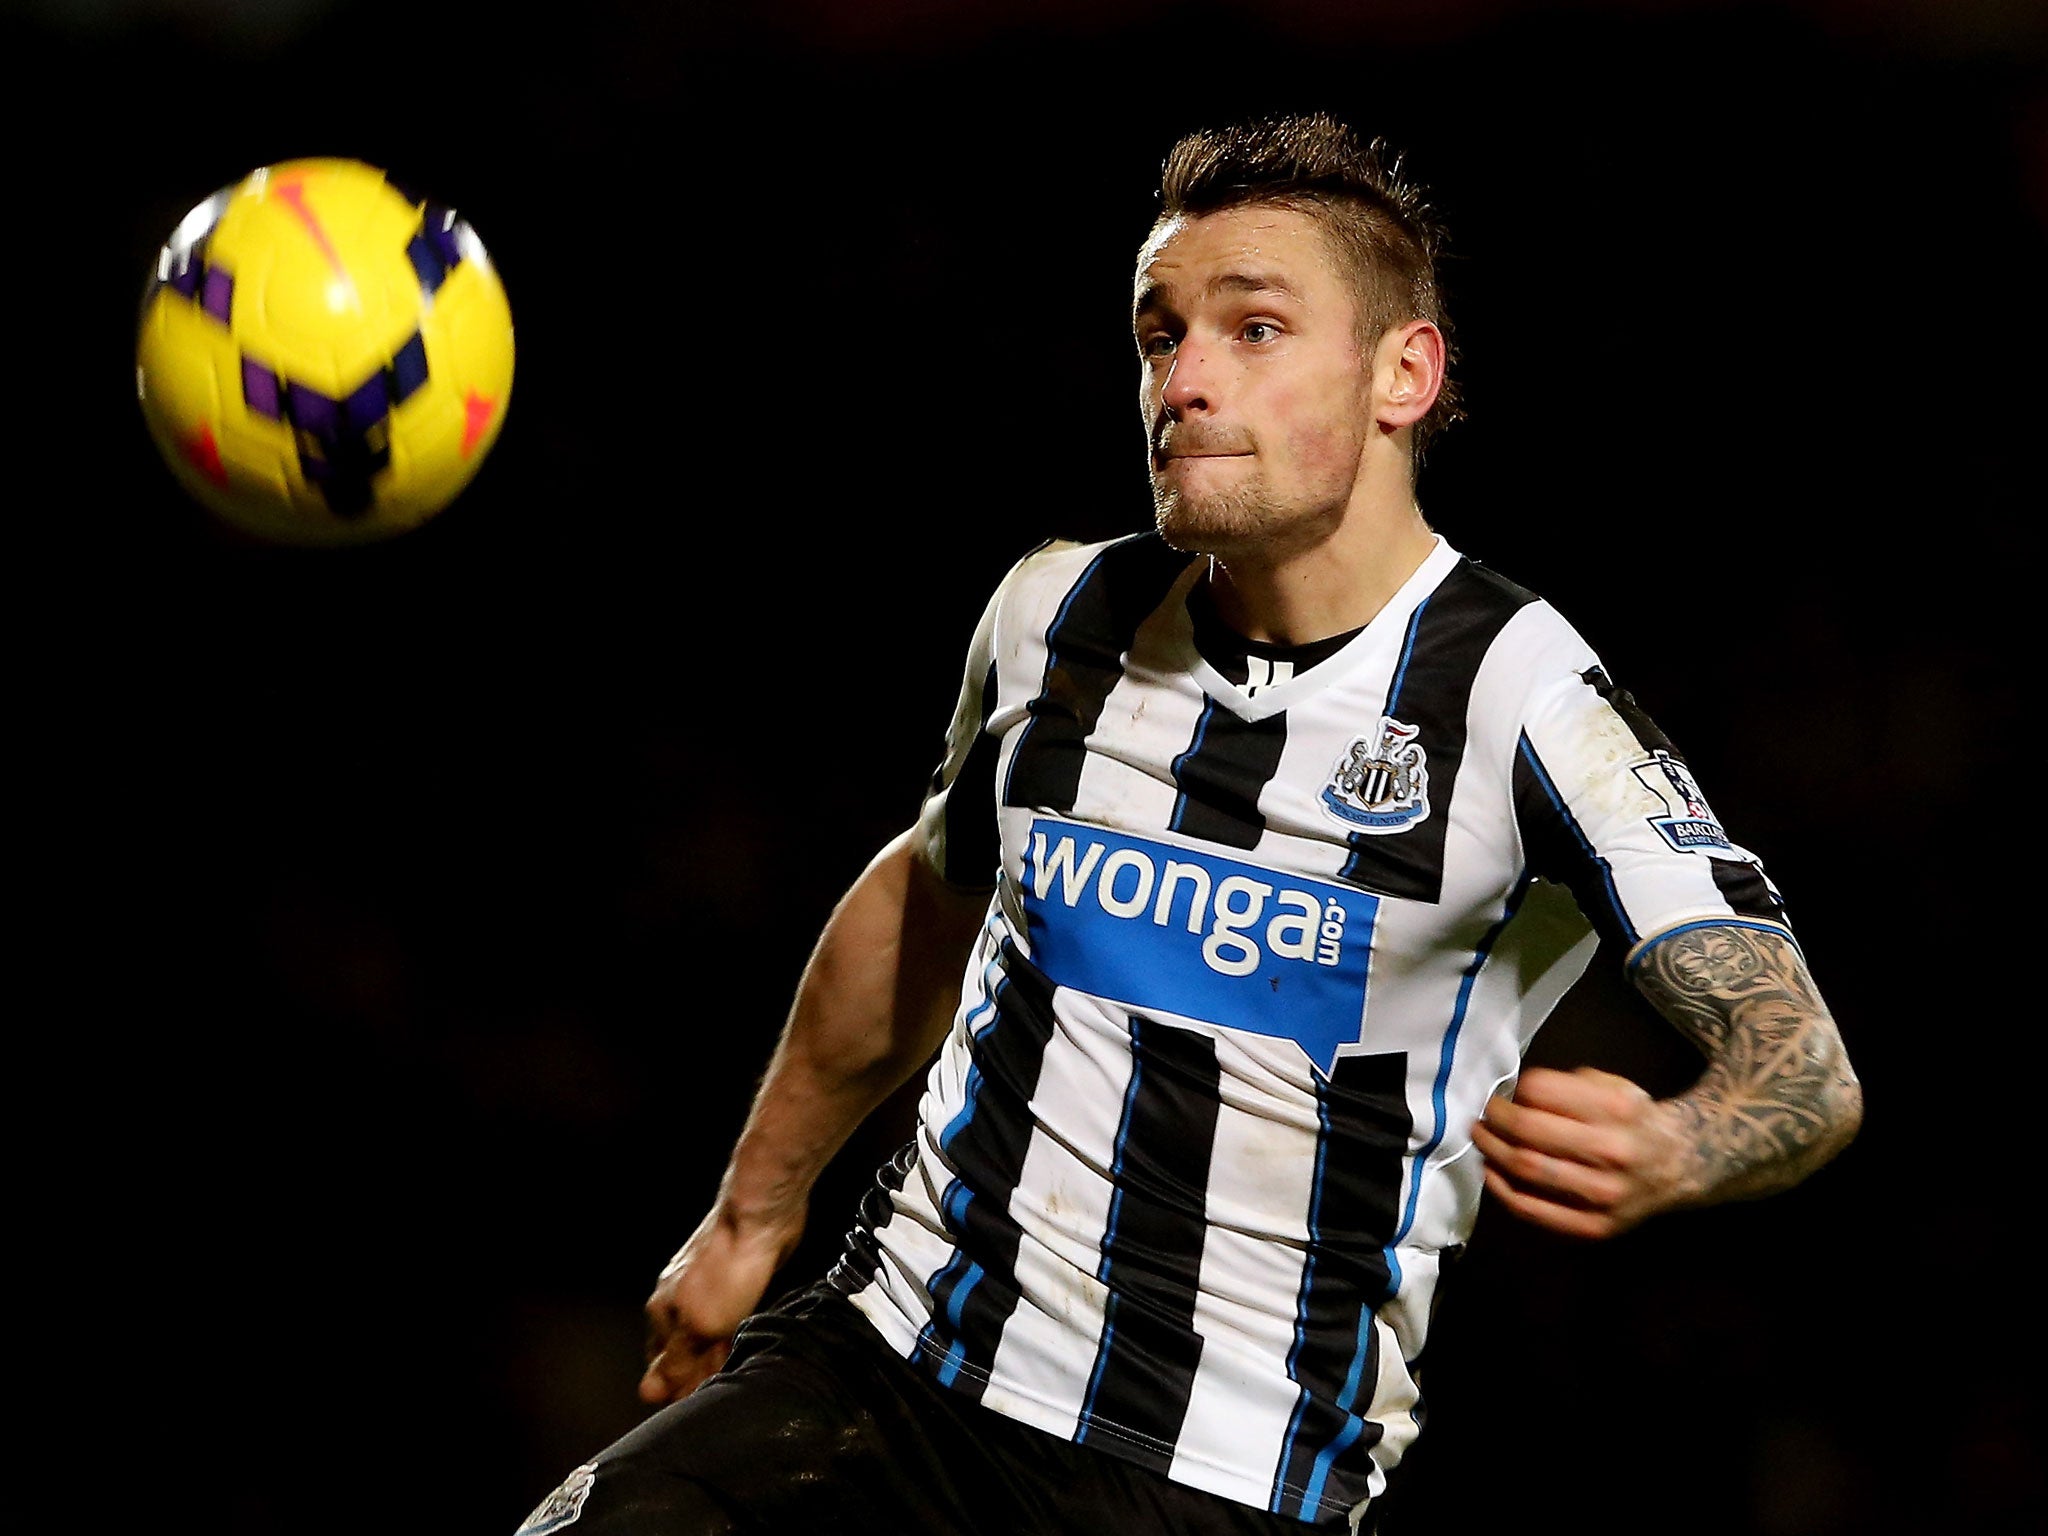 Newcastle's Mathieu Debuchy is on the verge of joining Arsenal in an £11 million deal